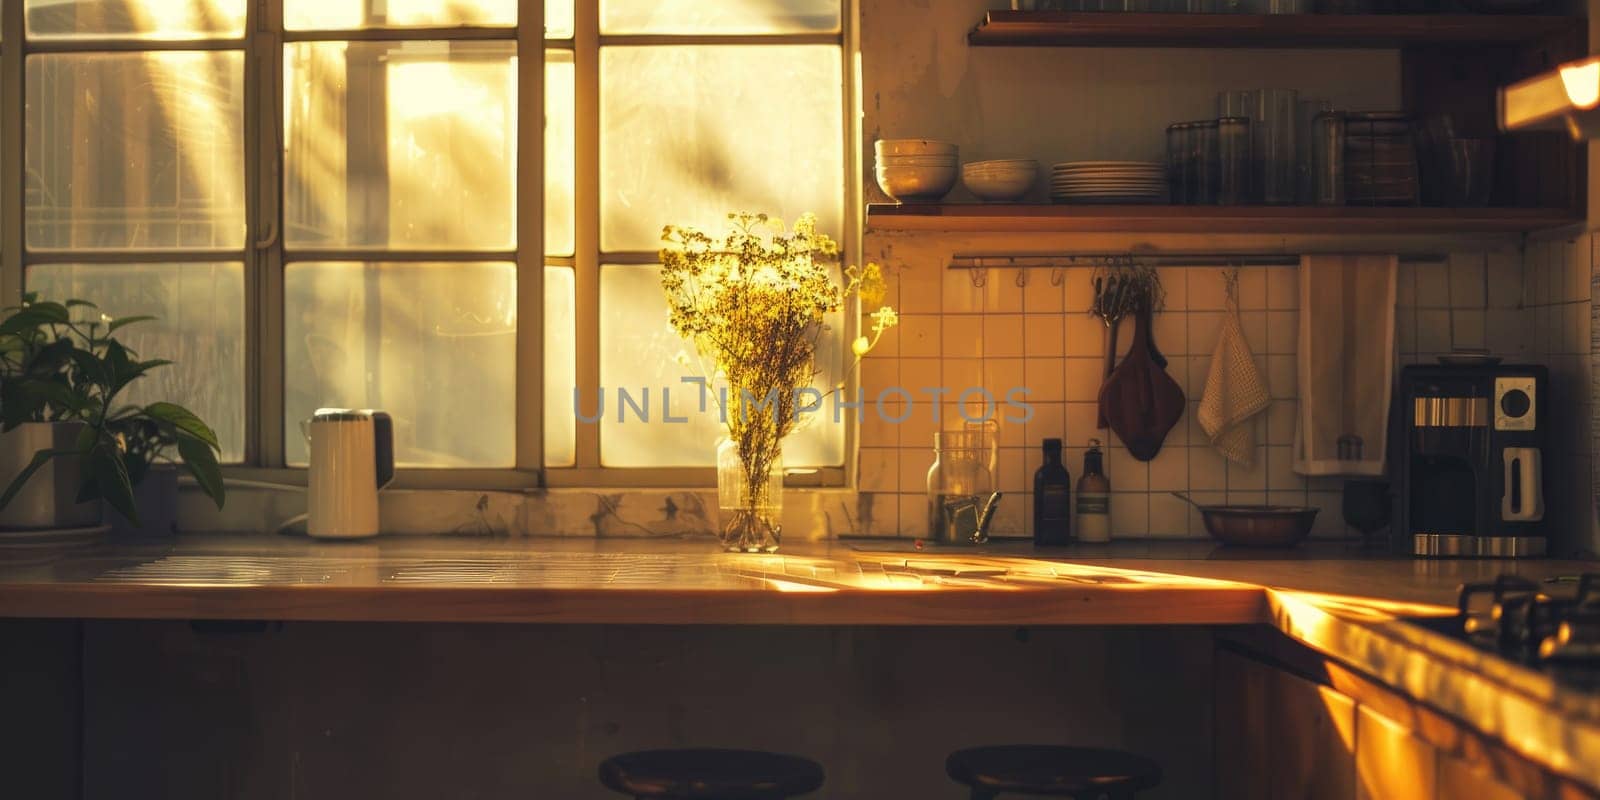 A kitchen with a window and a vase of flowers on the counter by wichayada